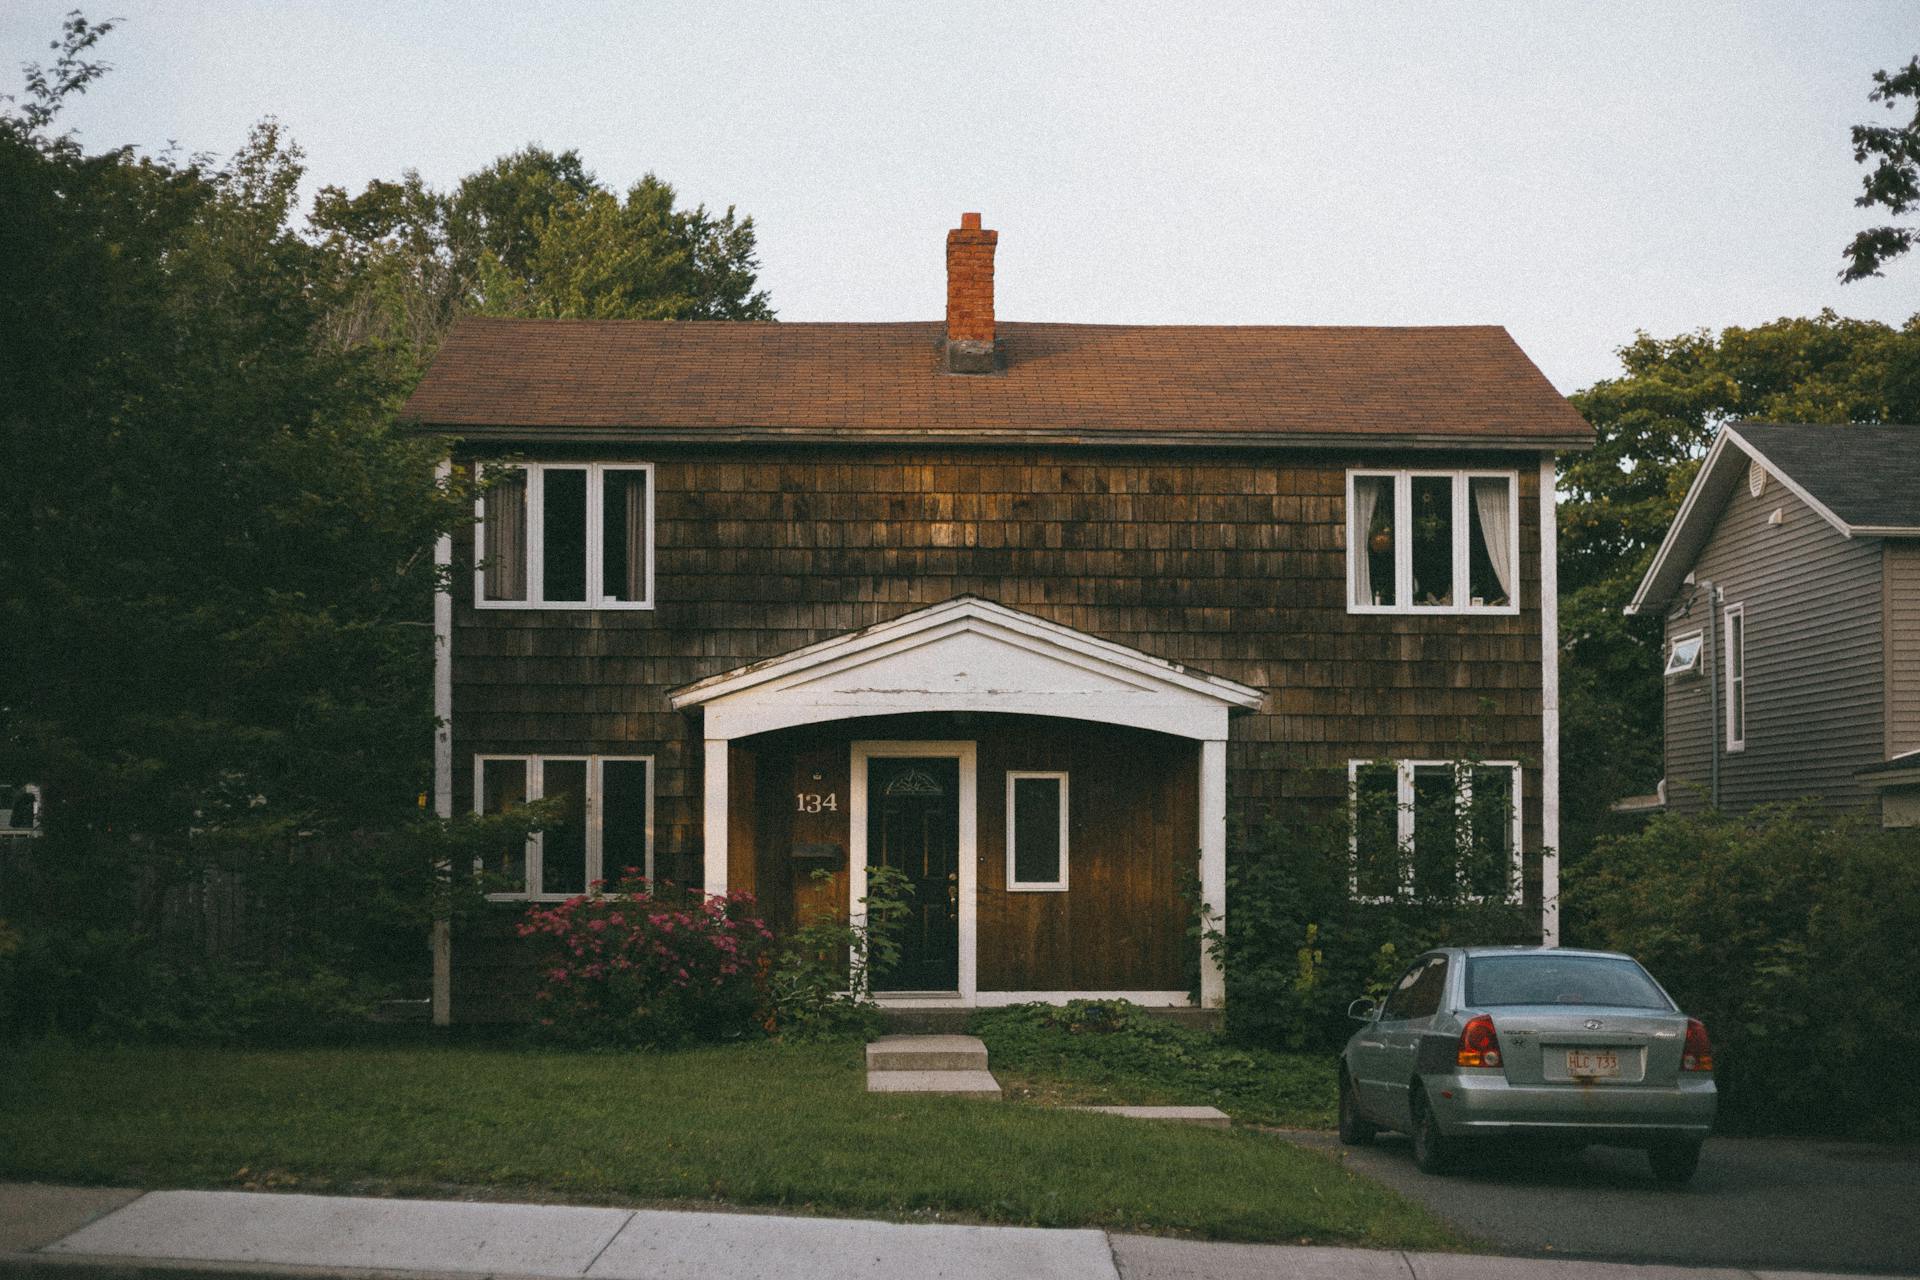 A car parked outside a house | Source: Pexels